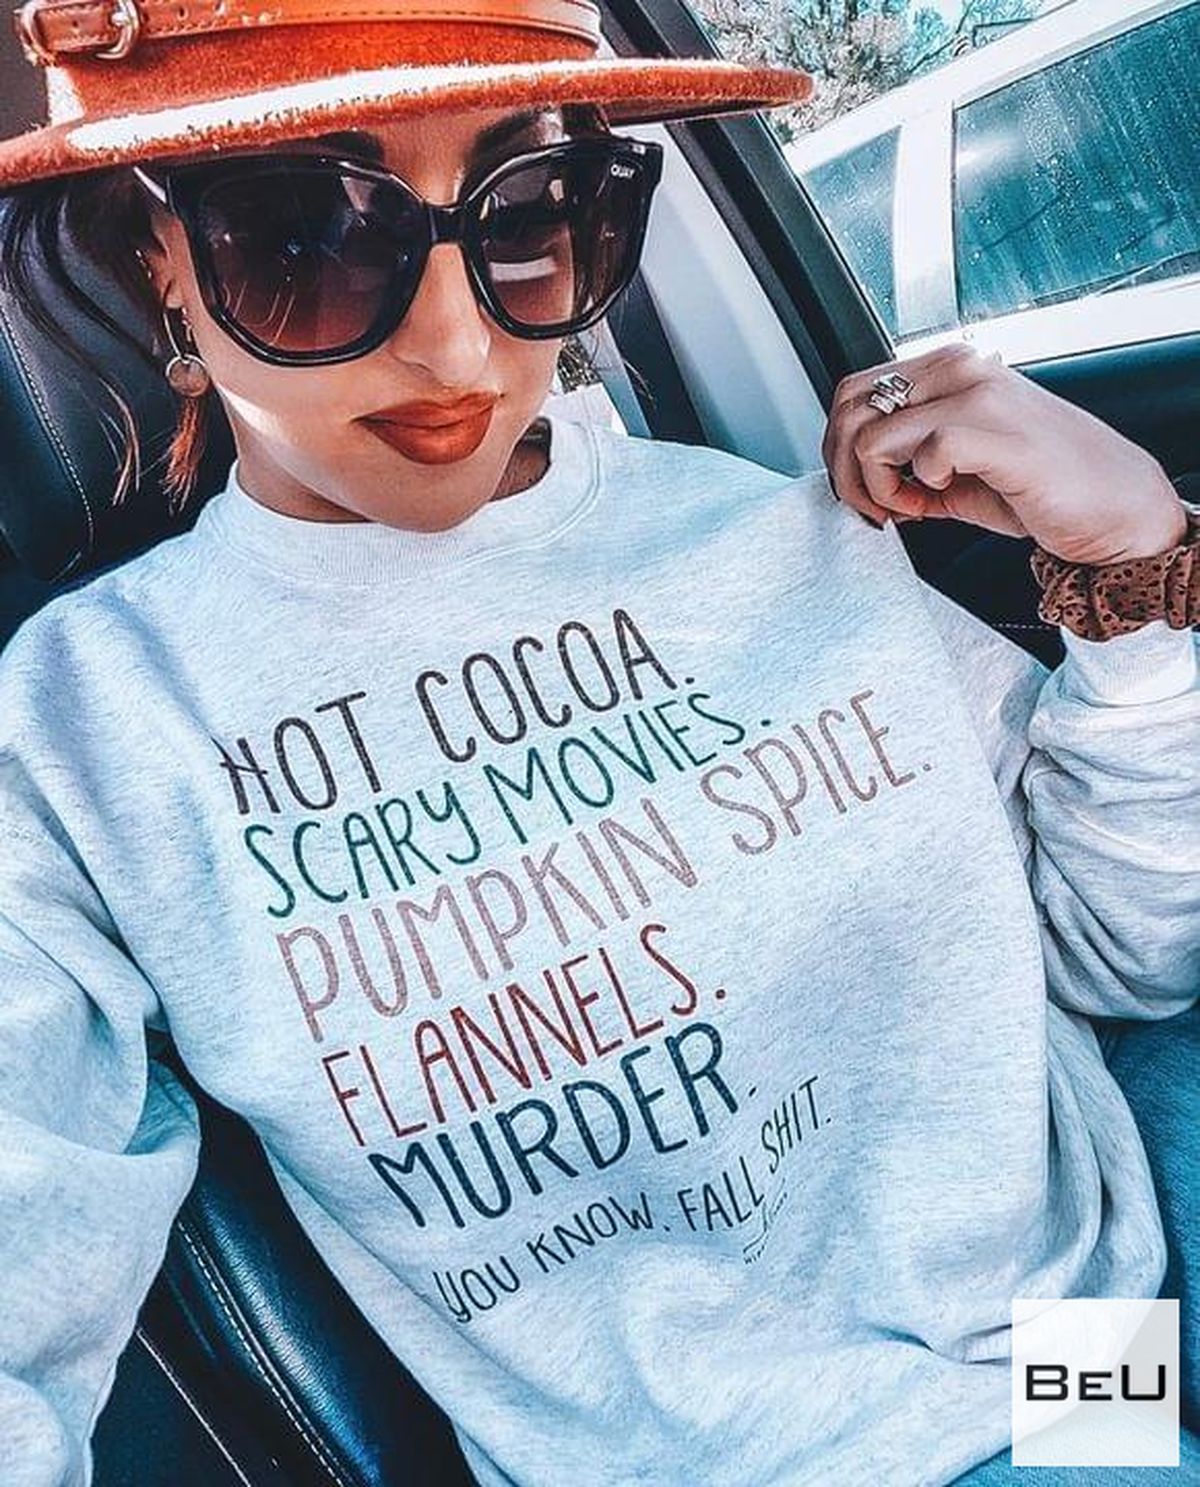 Hot Cocoa Scary Movies Pumpkin Spice Flannels Murder Shirt